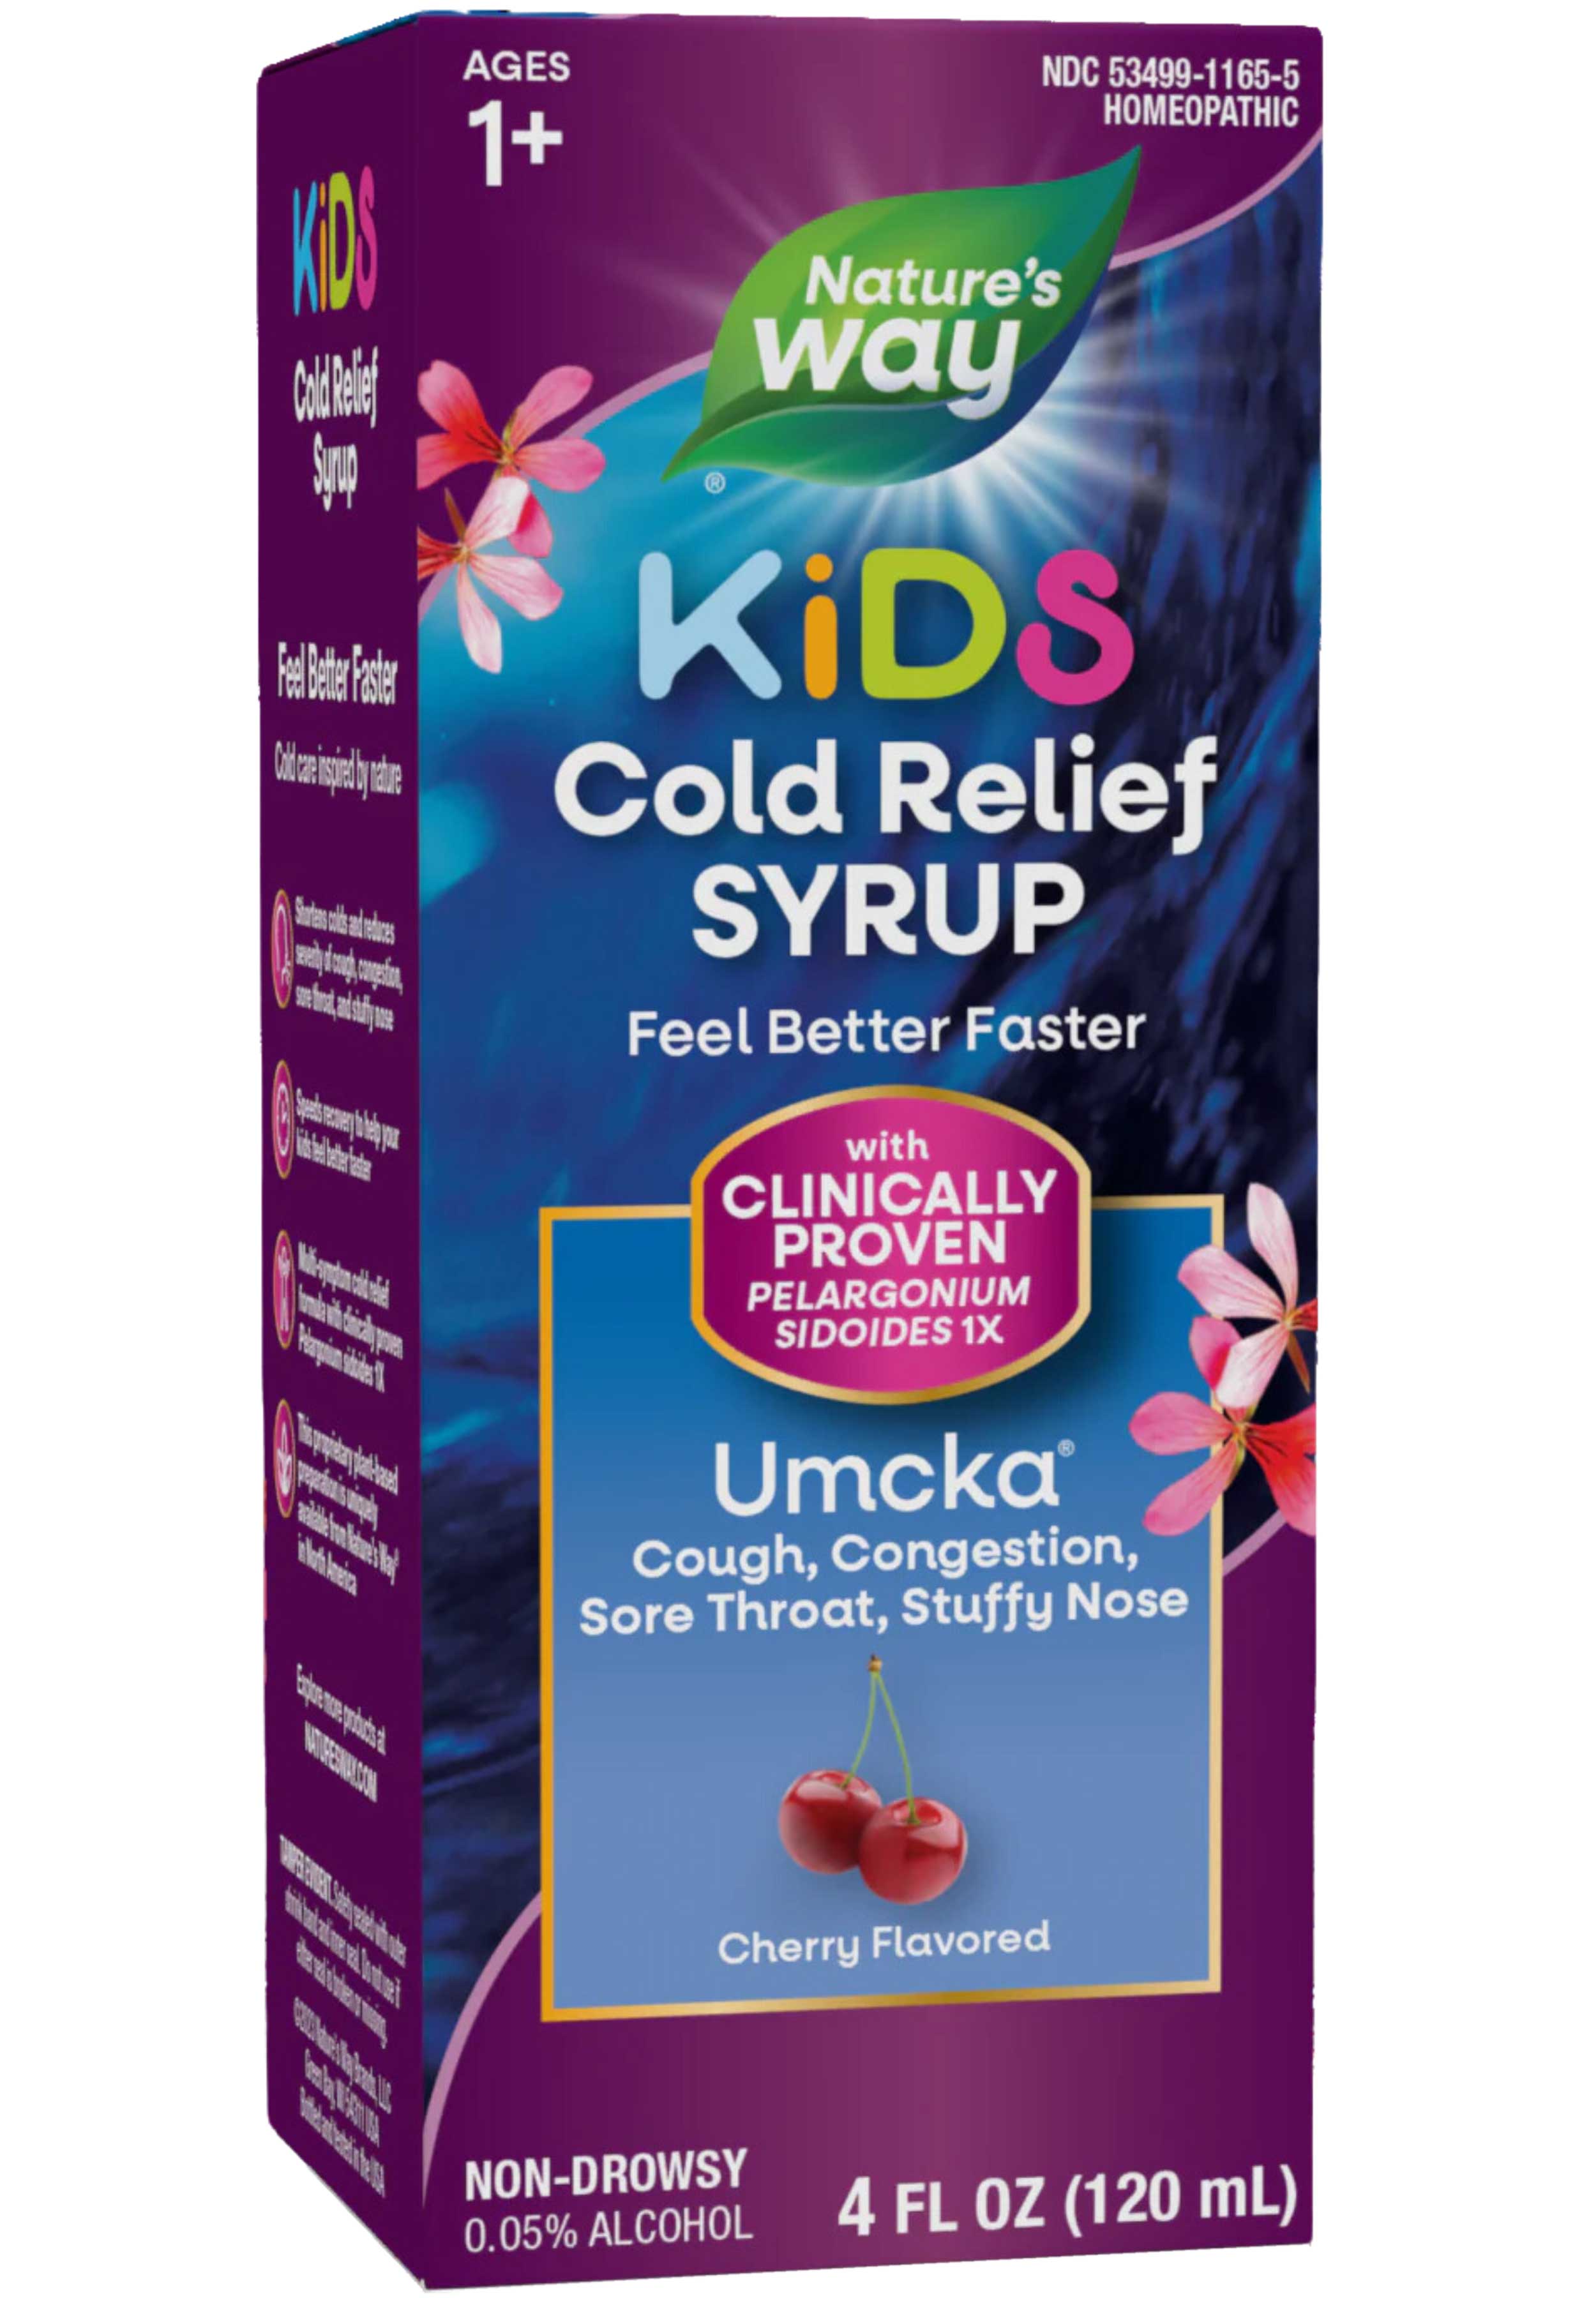 Nature's Way Umcka Kids Cold Relief Syrup